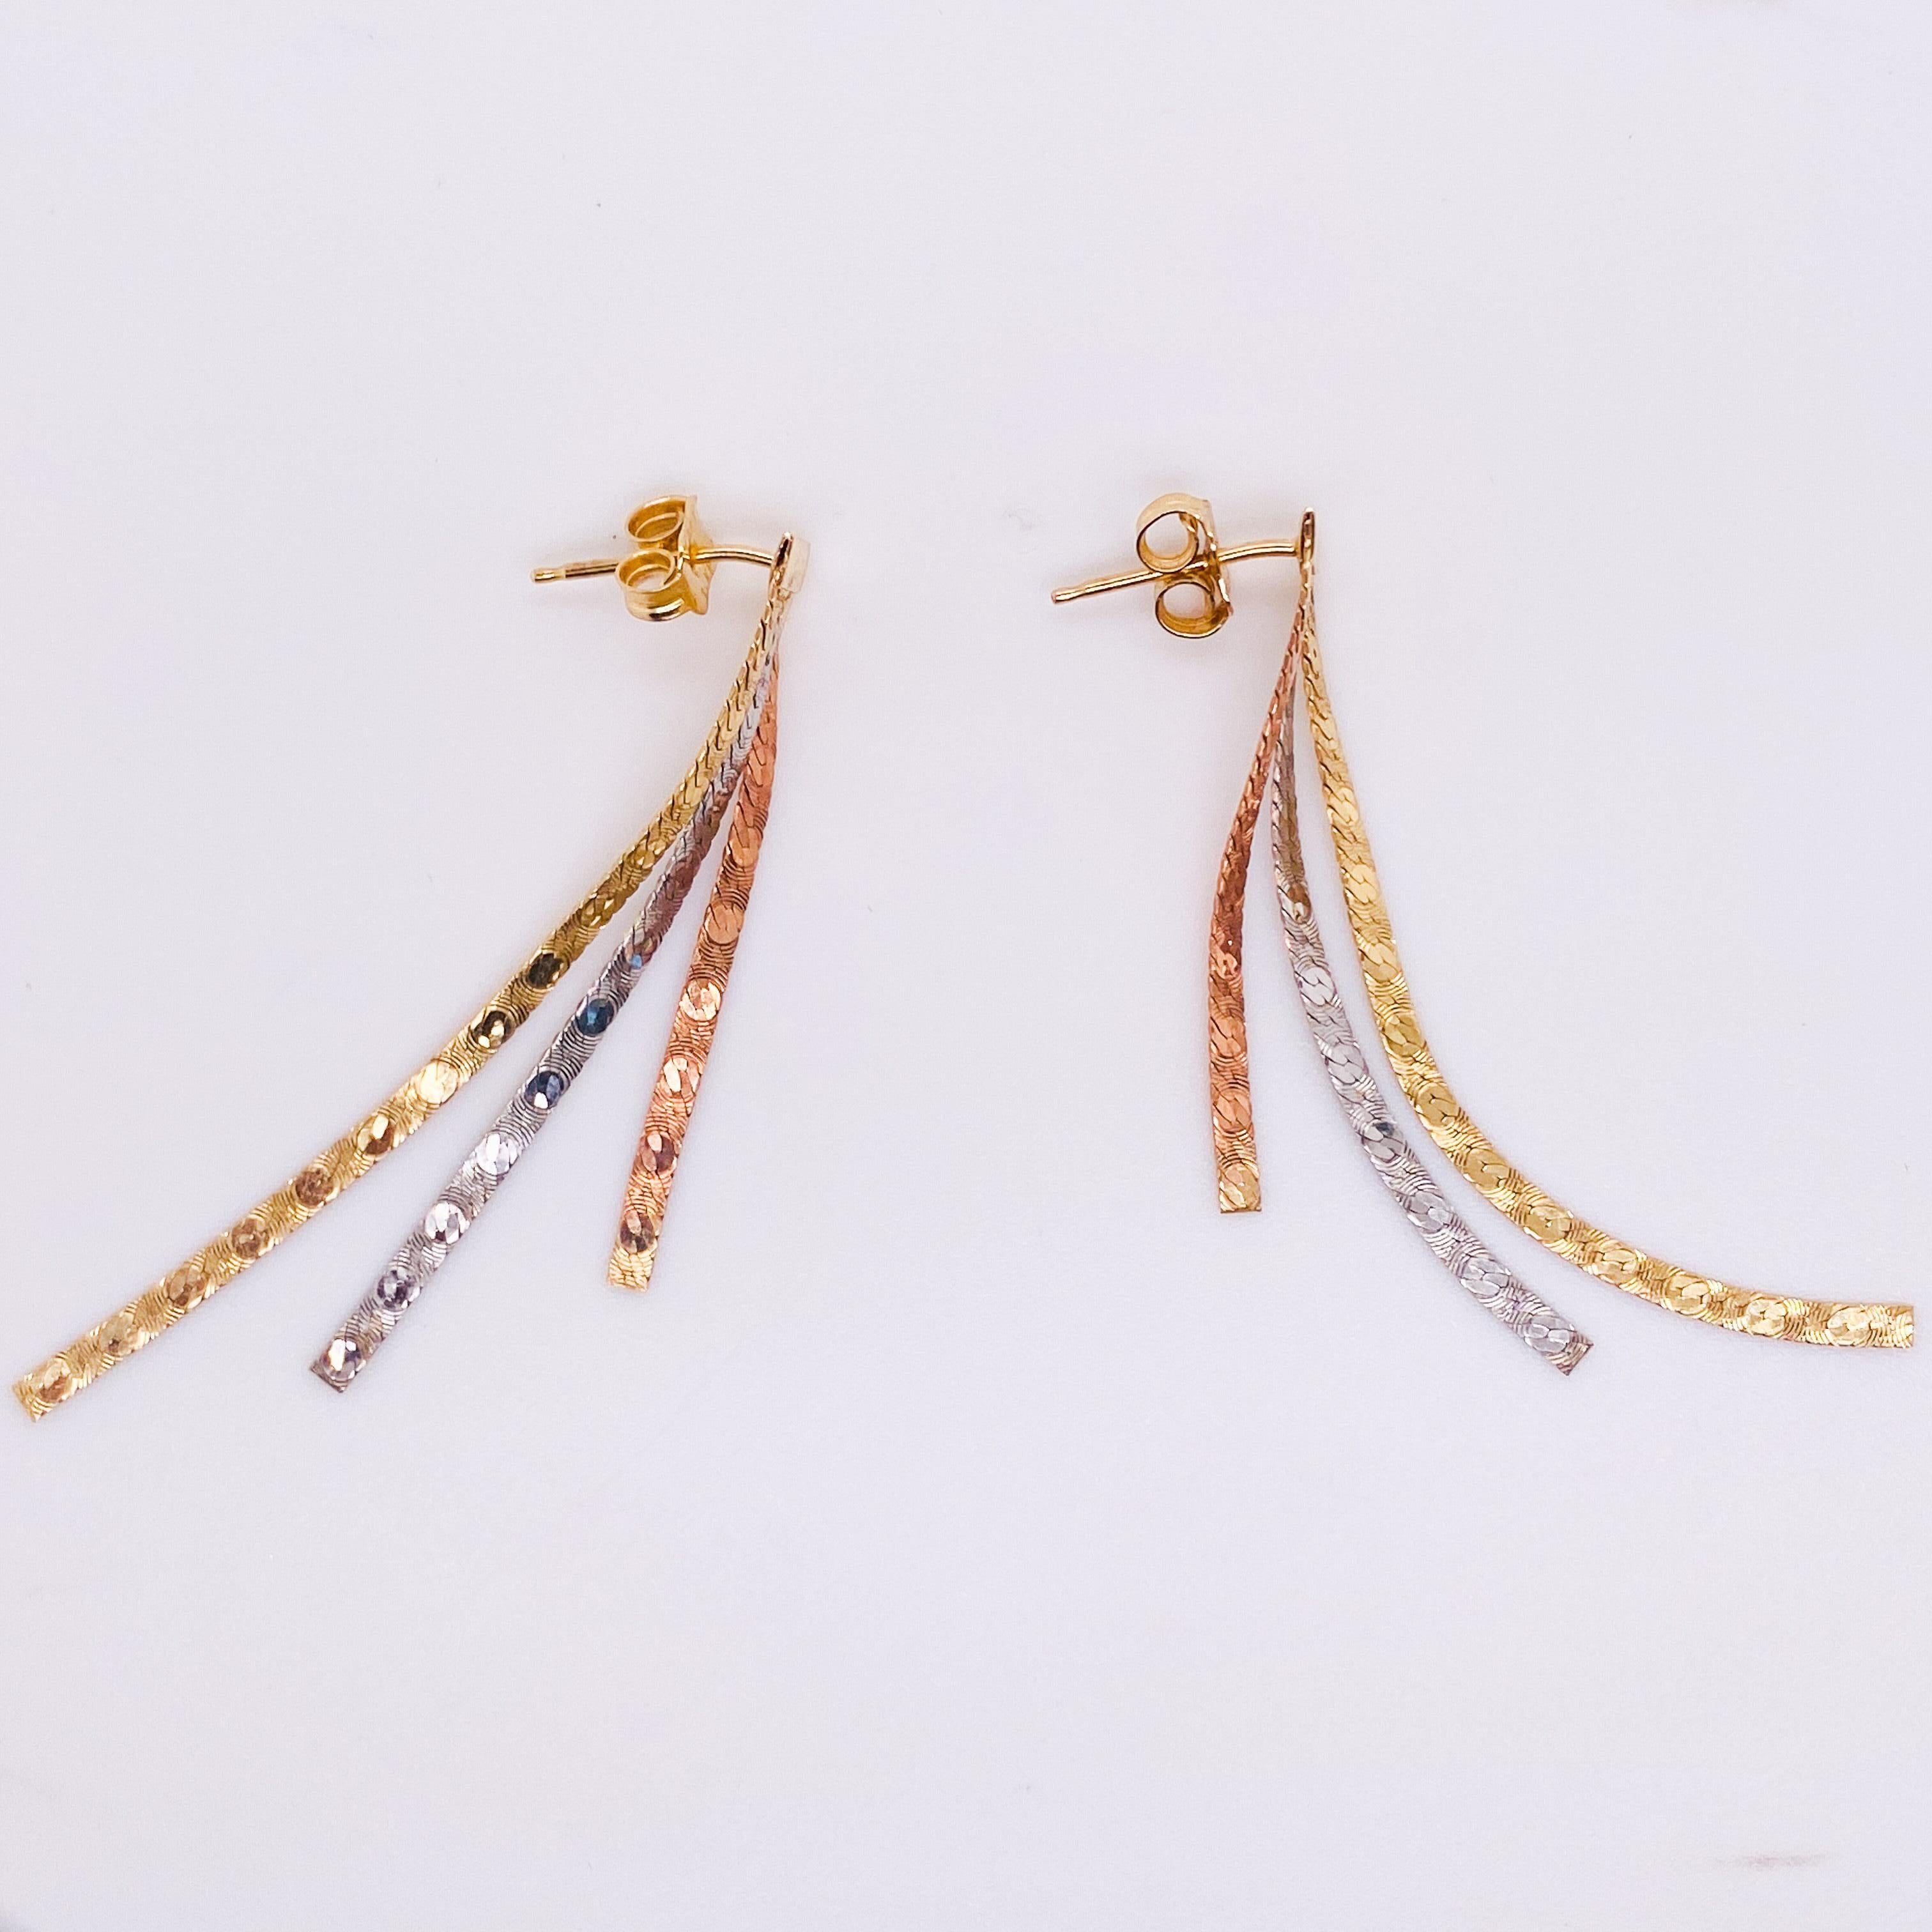 These clever mixed metal earrings look great for any occasion! The were made in Italy out of a combination of 14 karat yellow gold, white gold, and rose gold herringbone chain. The earring tops are a 14 karat yellow gold bar and post with friction